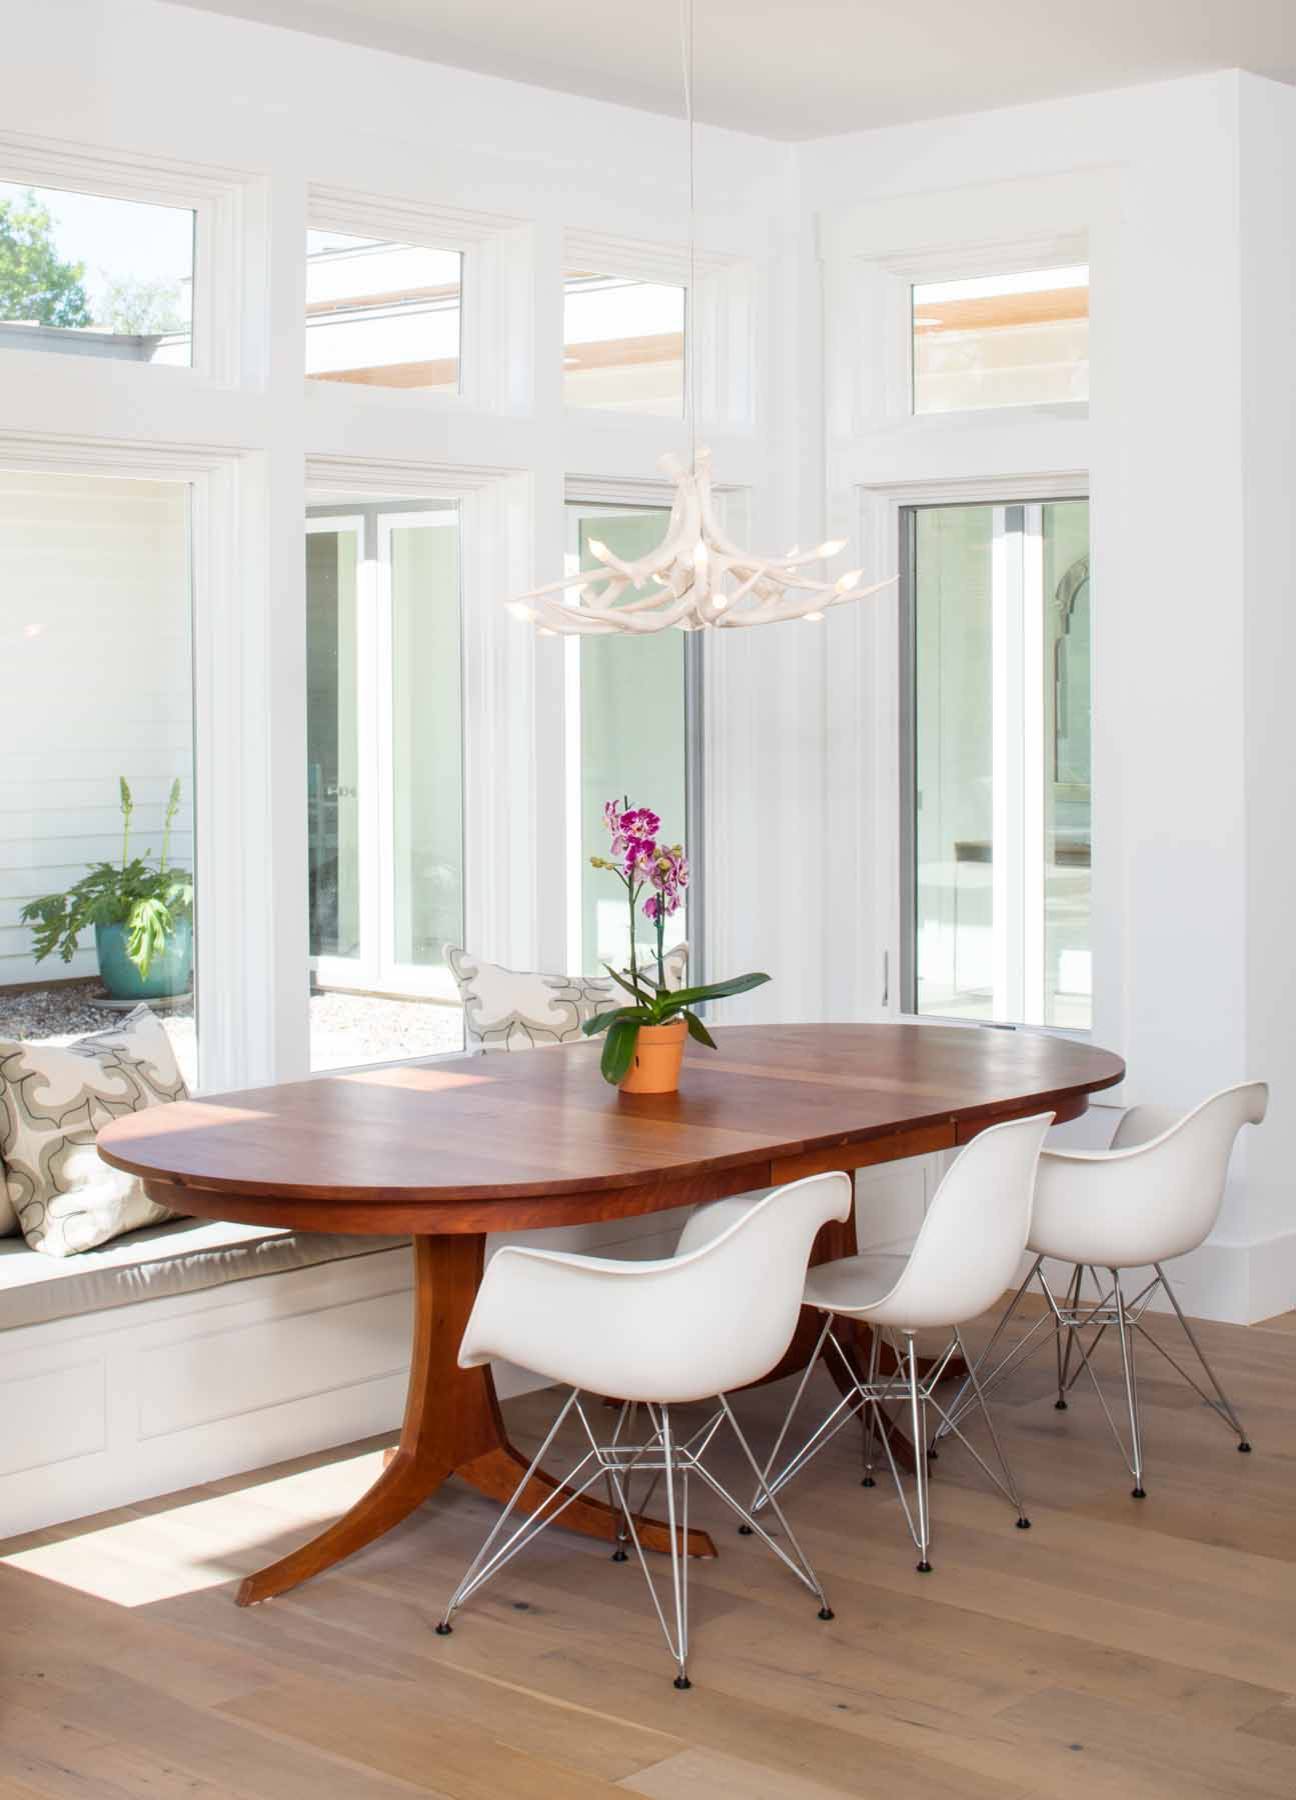 Oval Table With Bench - Photos & Ideas | Houzz